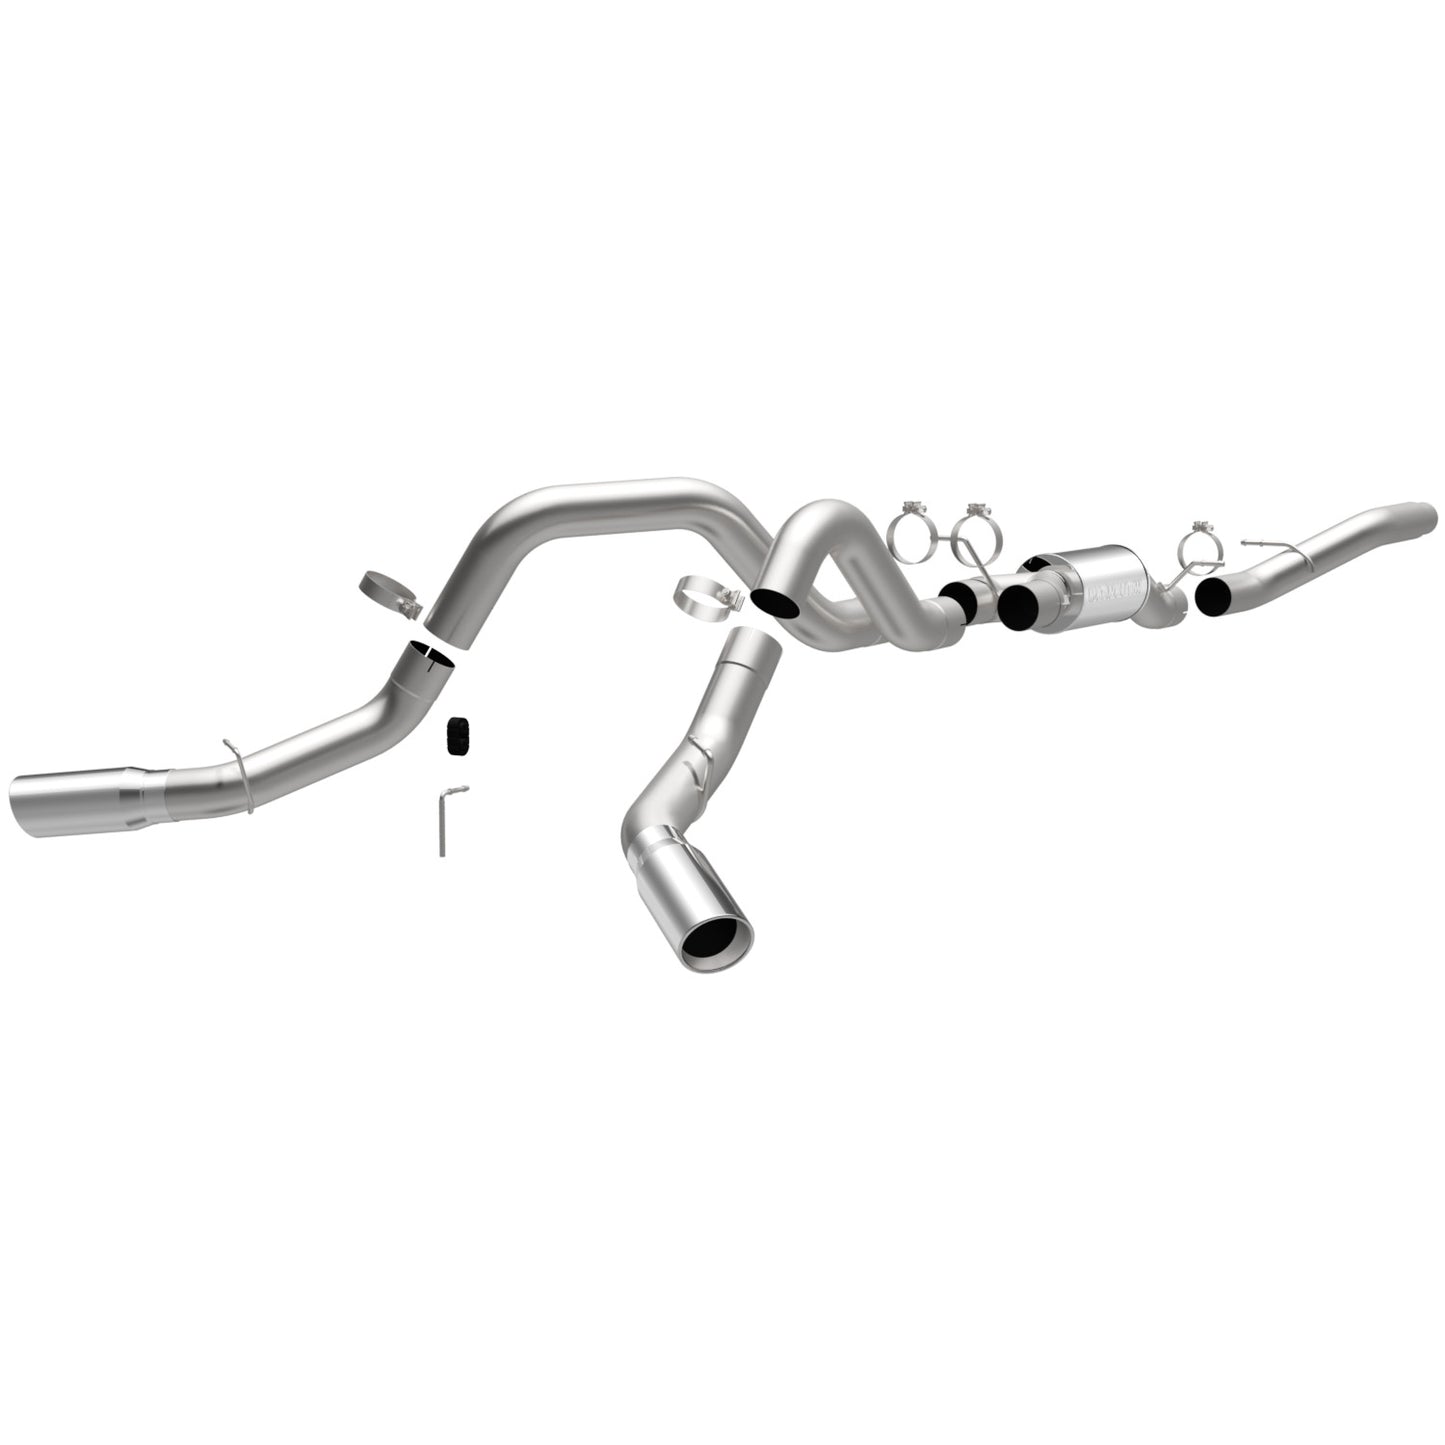 MagnaFlow Performance Series Cat-Back Performance Exhaust System 16964